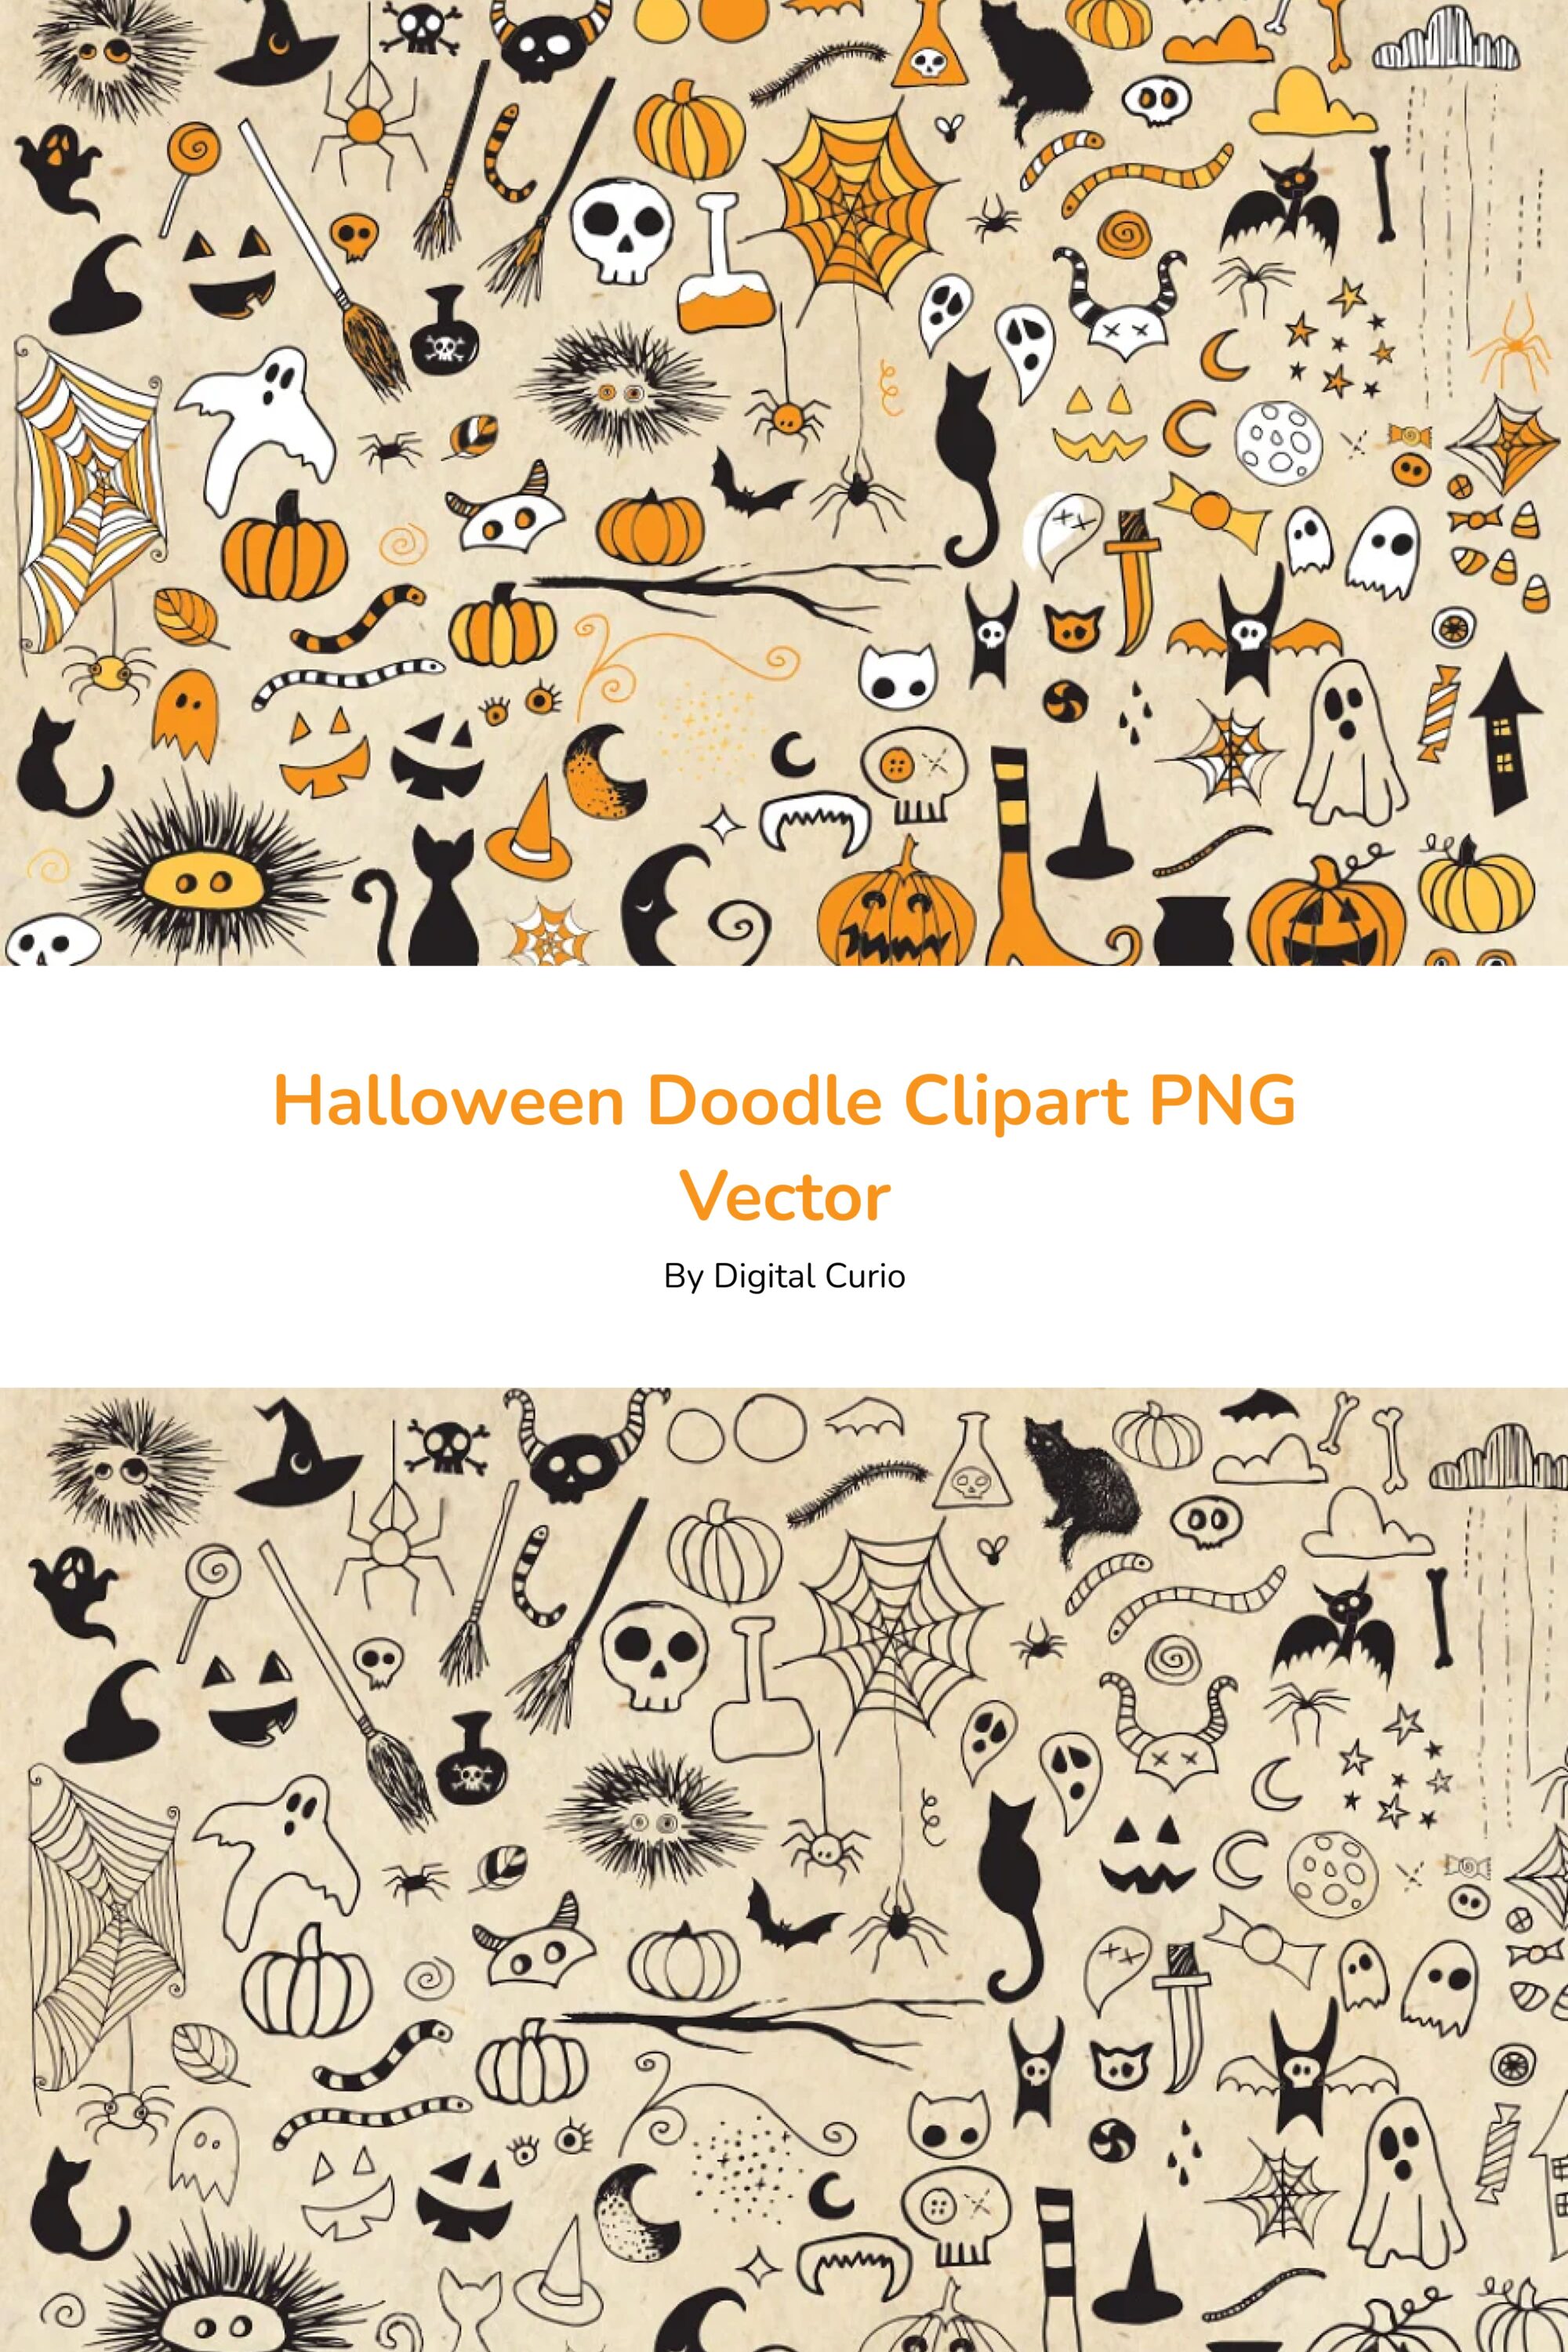 Beige background with many Halloween elements.